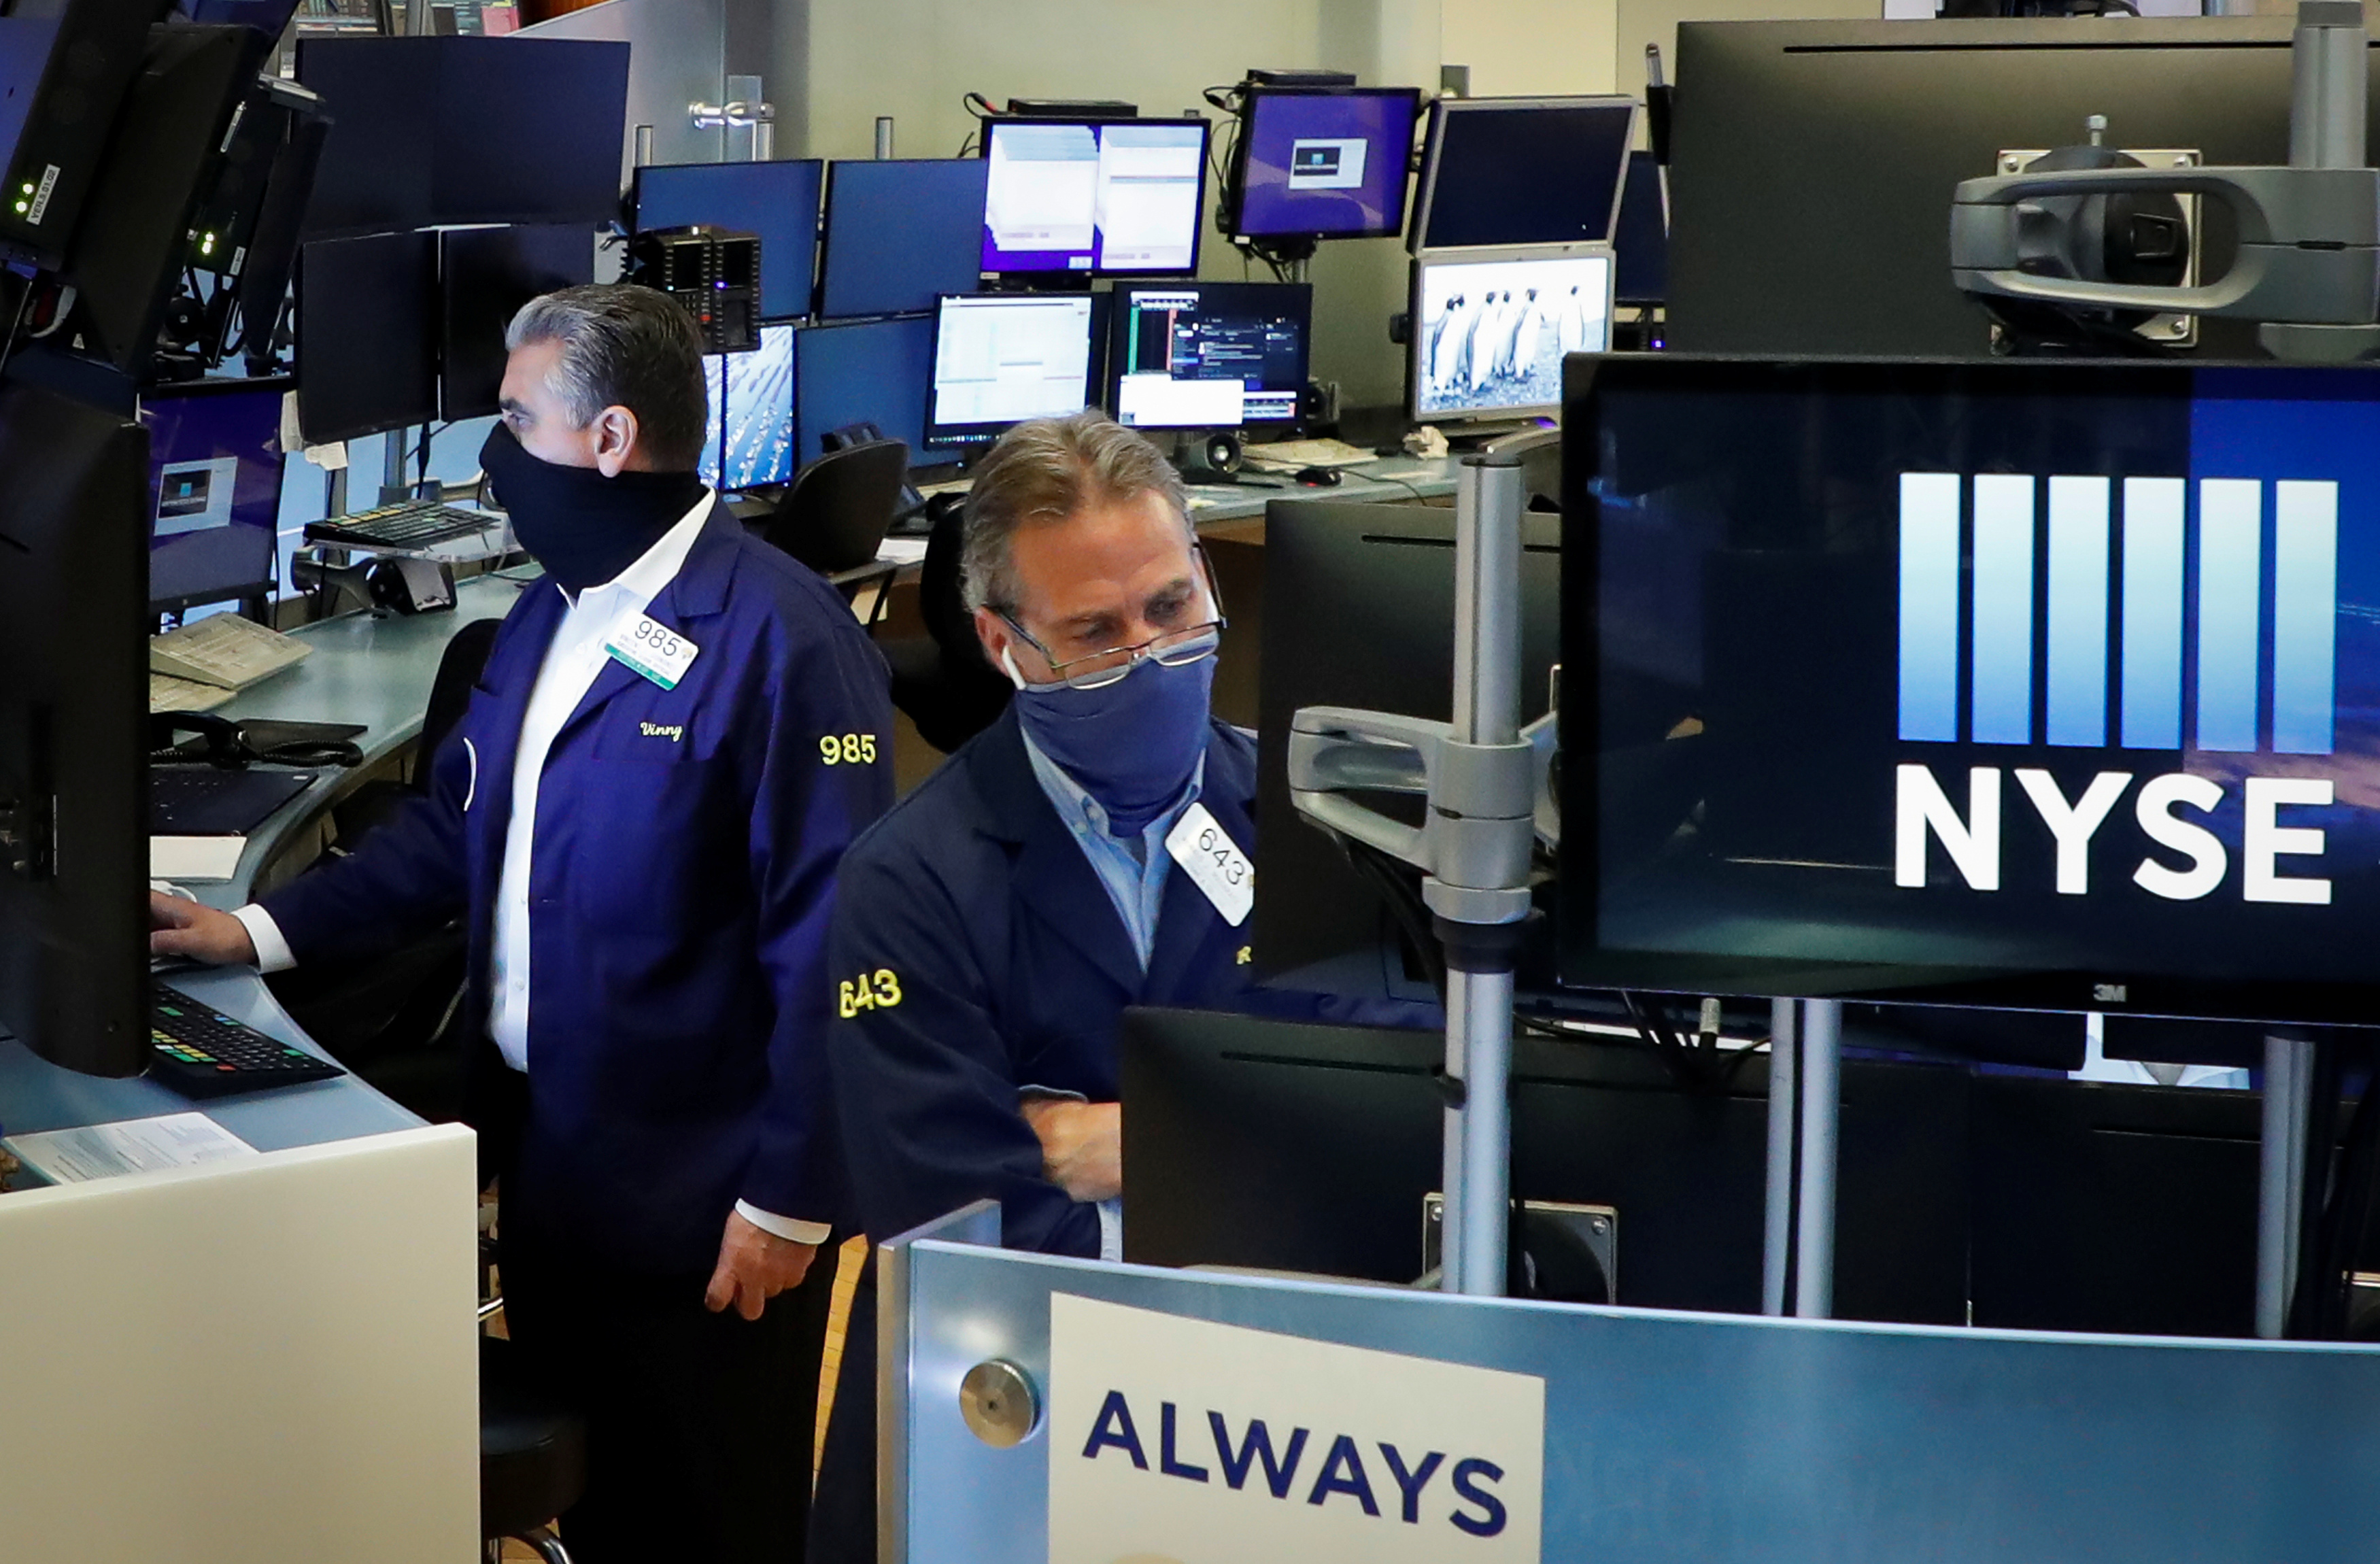 Traders wearing masks work, on the first day of in person trading since the closure during the outbreak of the coronavirus disease (COVID-19) on the floor at the NYSE in New York